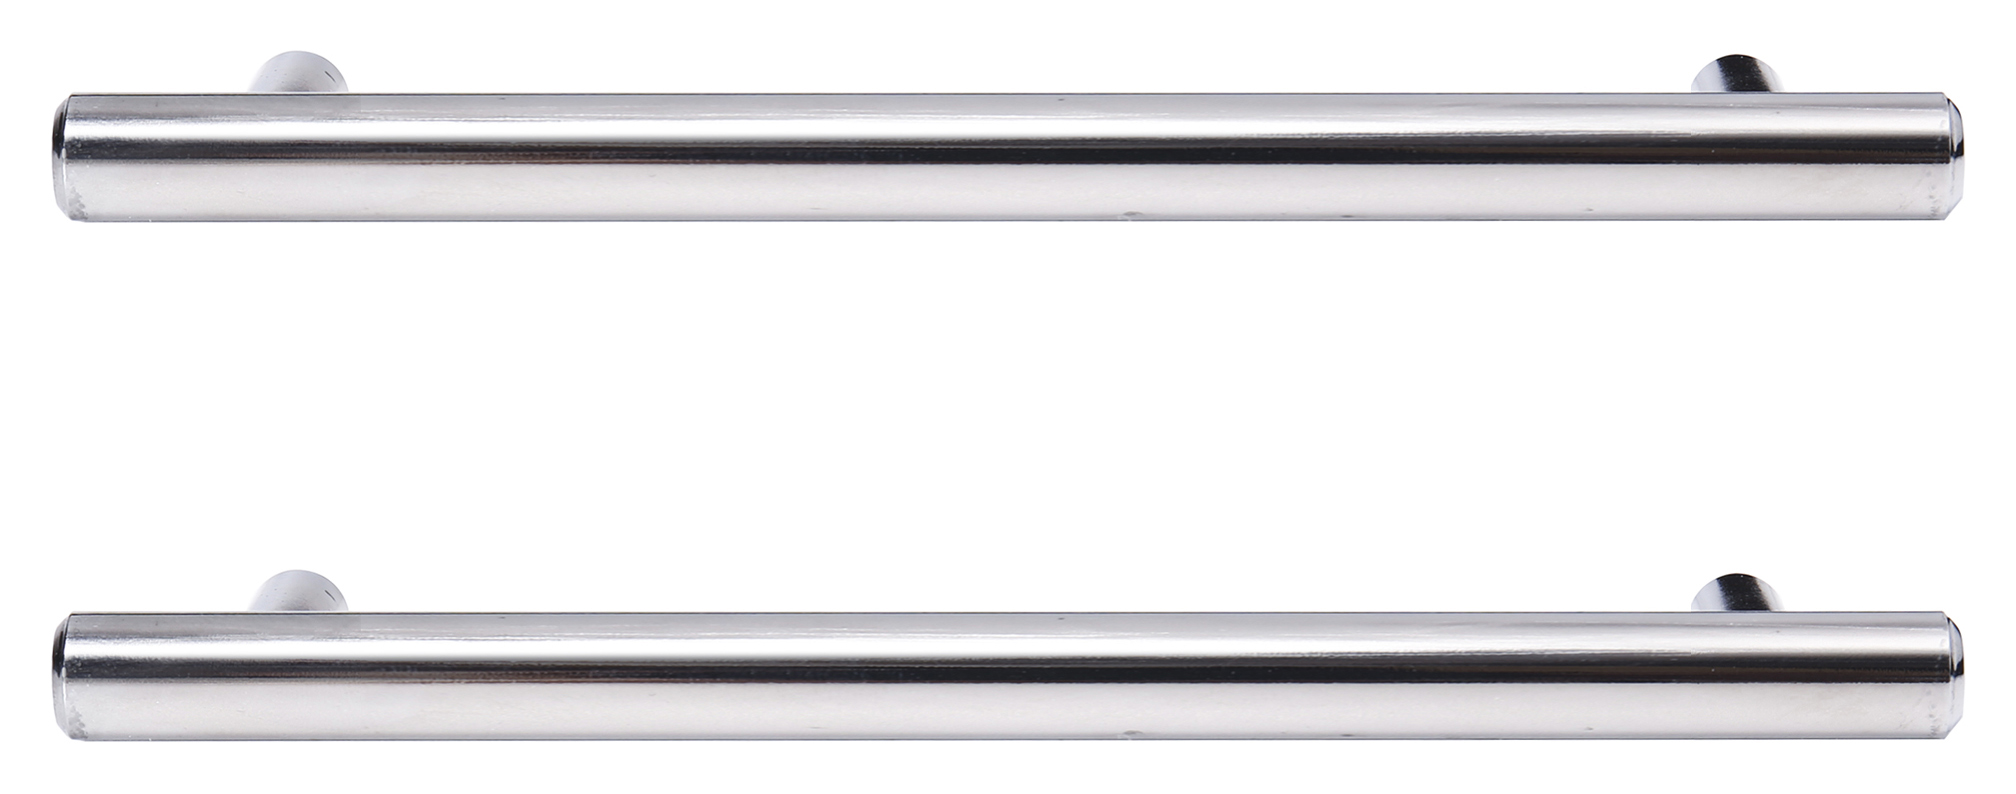 T Bar Cabinet Handle Polished Chrome 220mm - Pack of 2